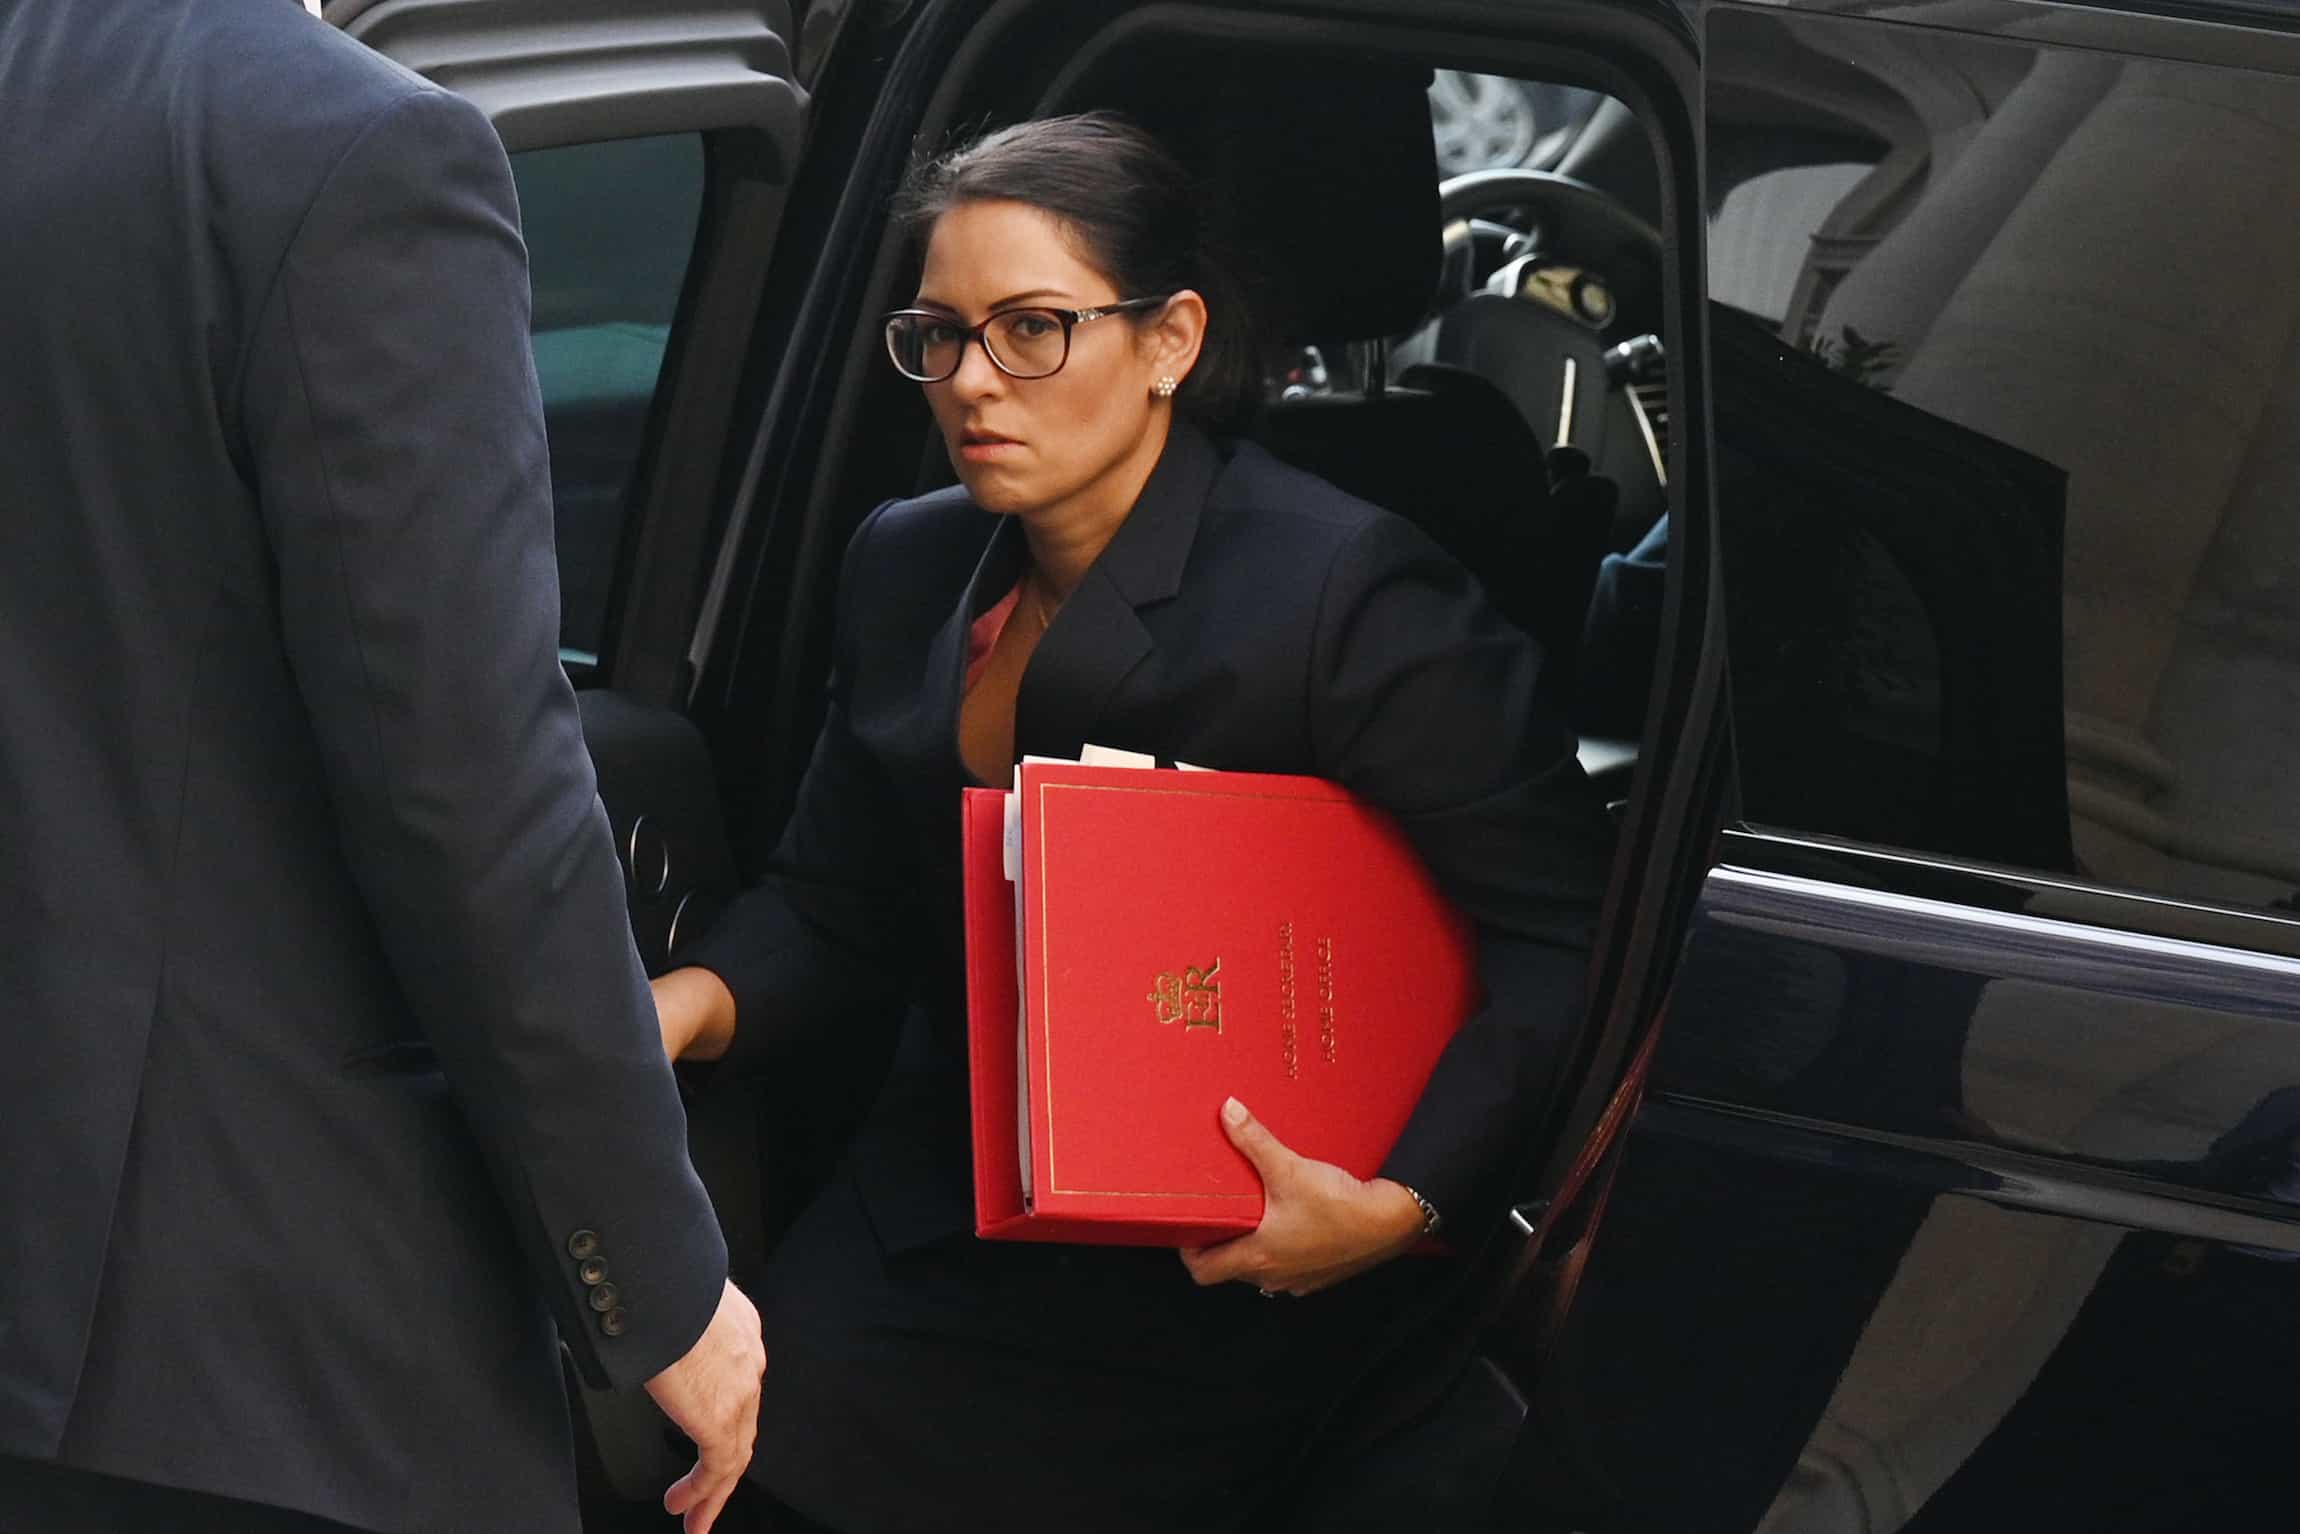 ‘Justice delayed is justice denied’ – Delay into Priti Patel bullying inquiry is ‘intolerable’